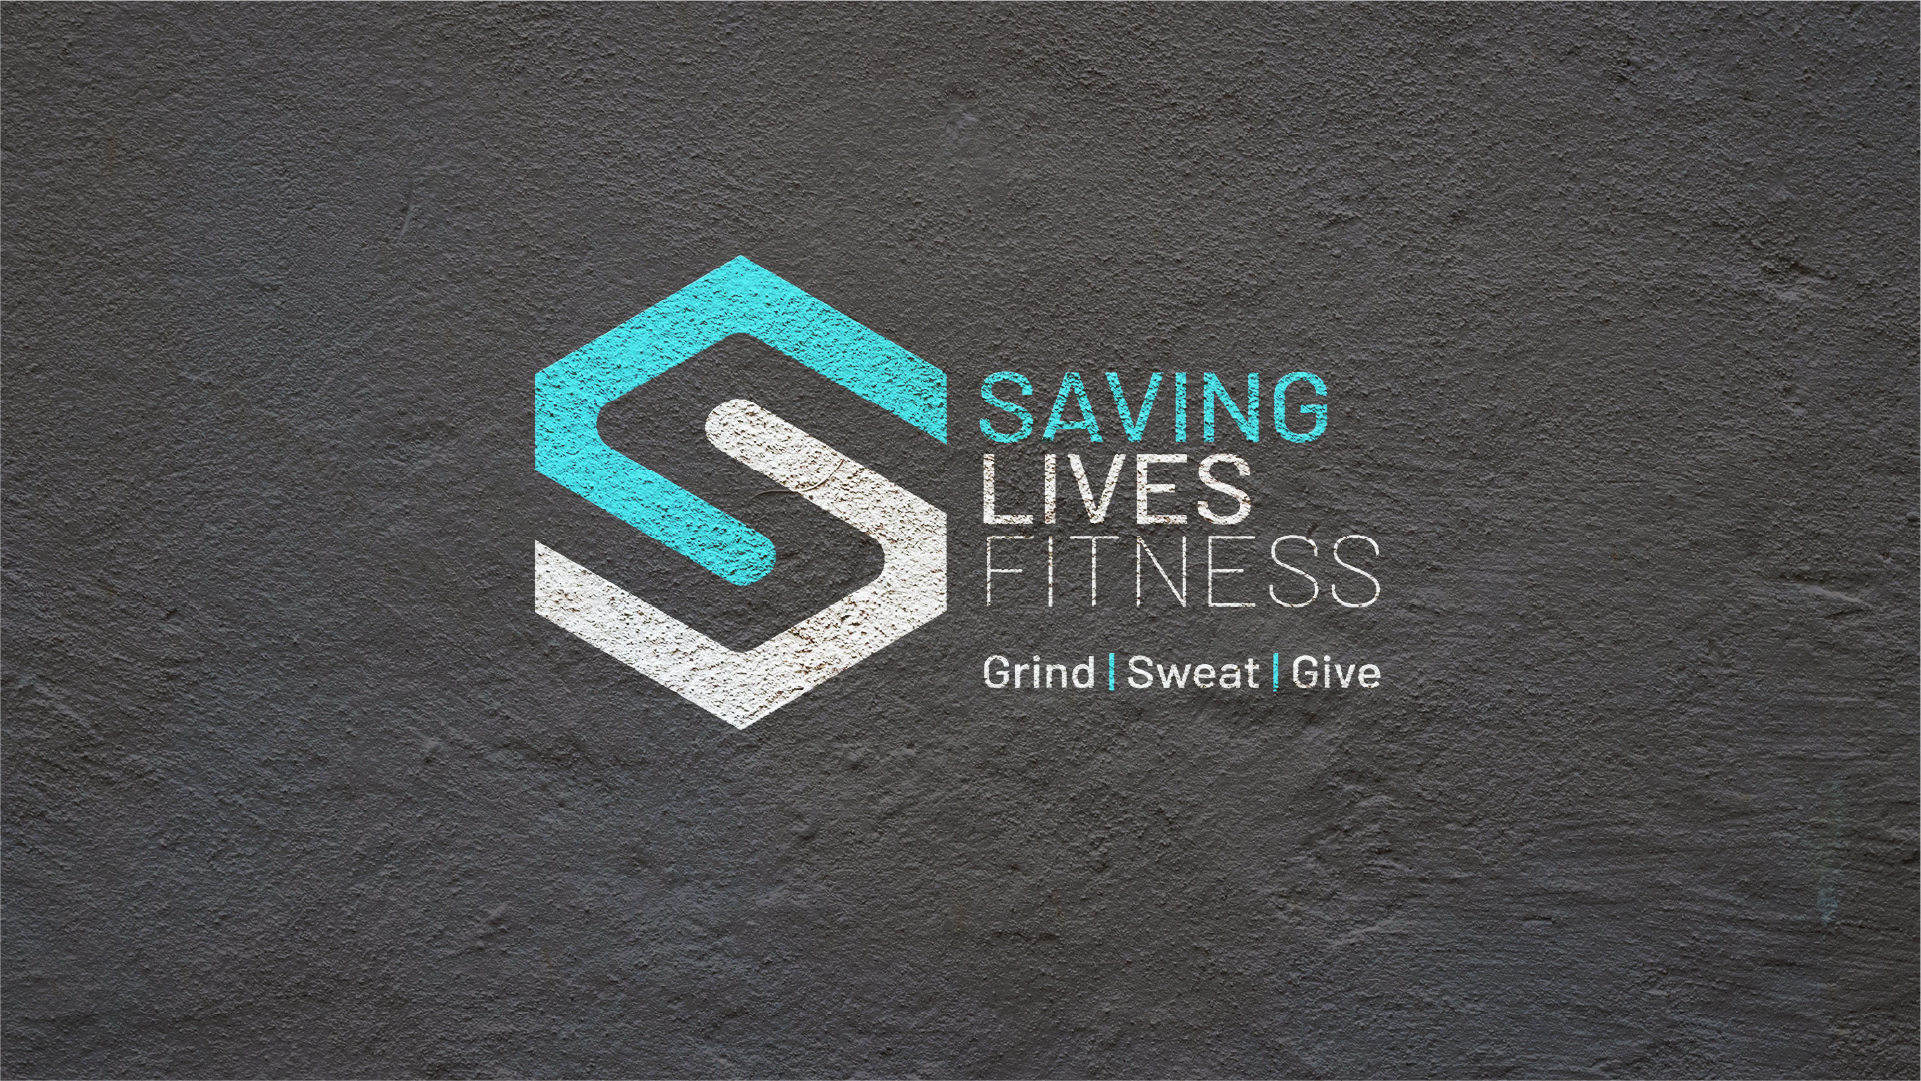 Logo design by REMEDY for Saving Lives Fitness on cement wall